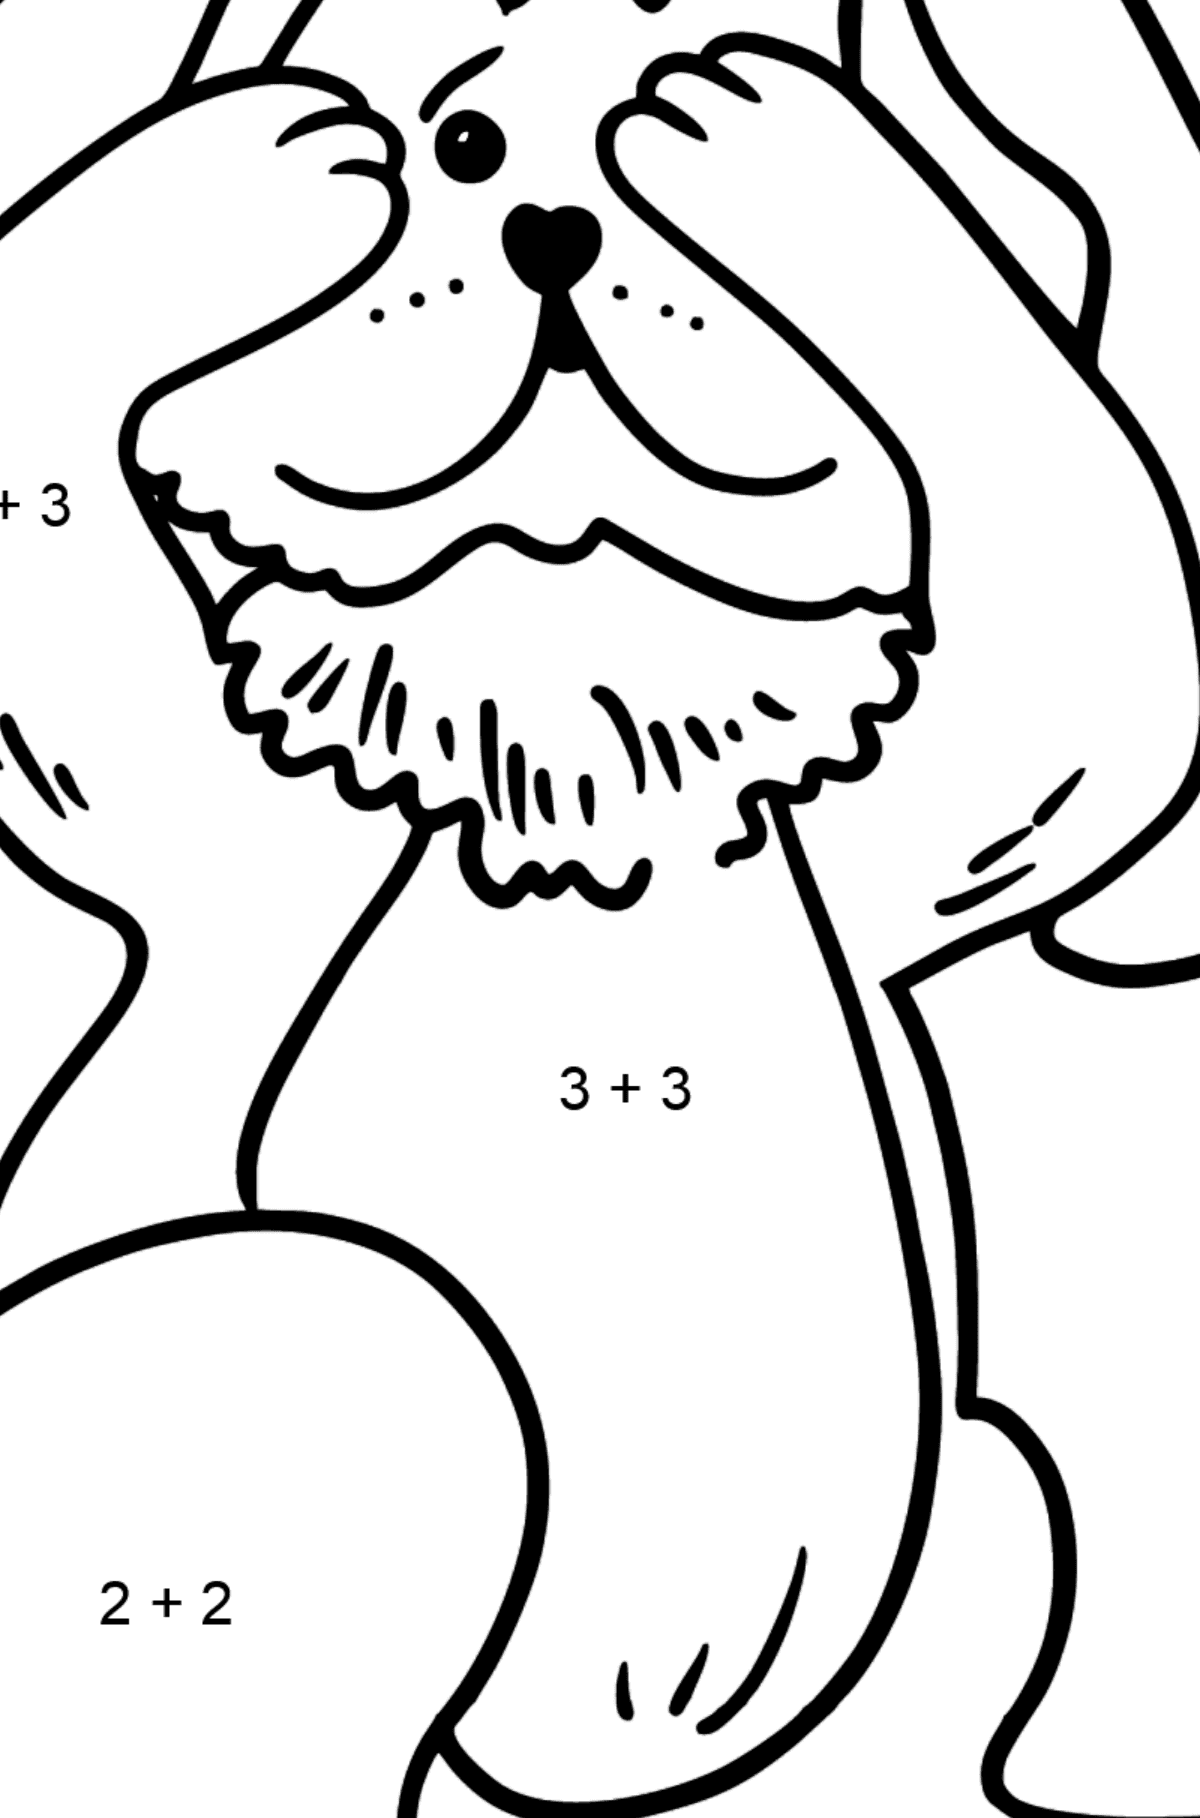 Scared Bunny coloring page - Math Coloring - Addition for Kids